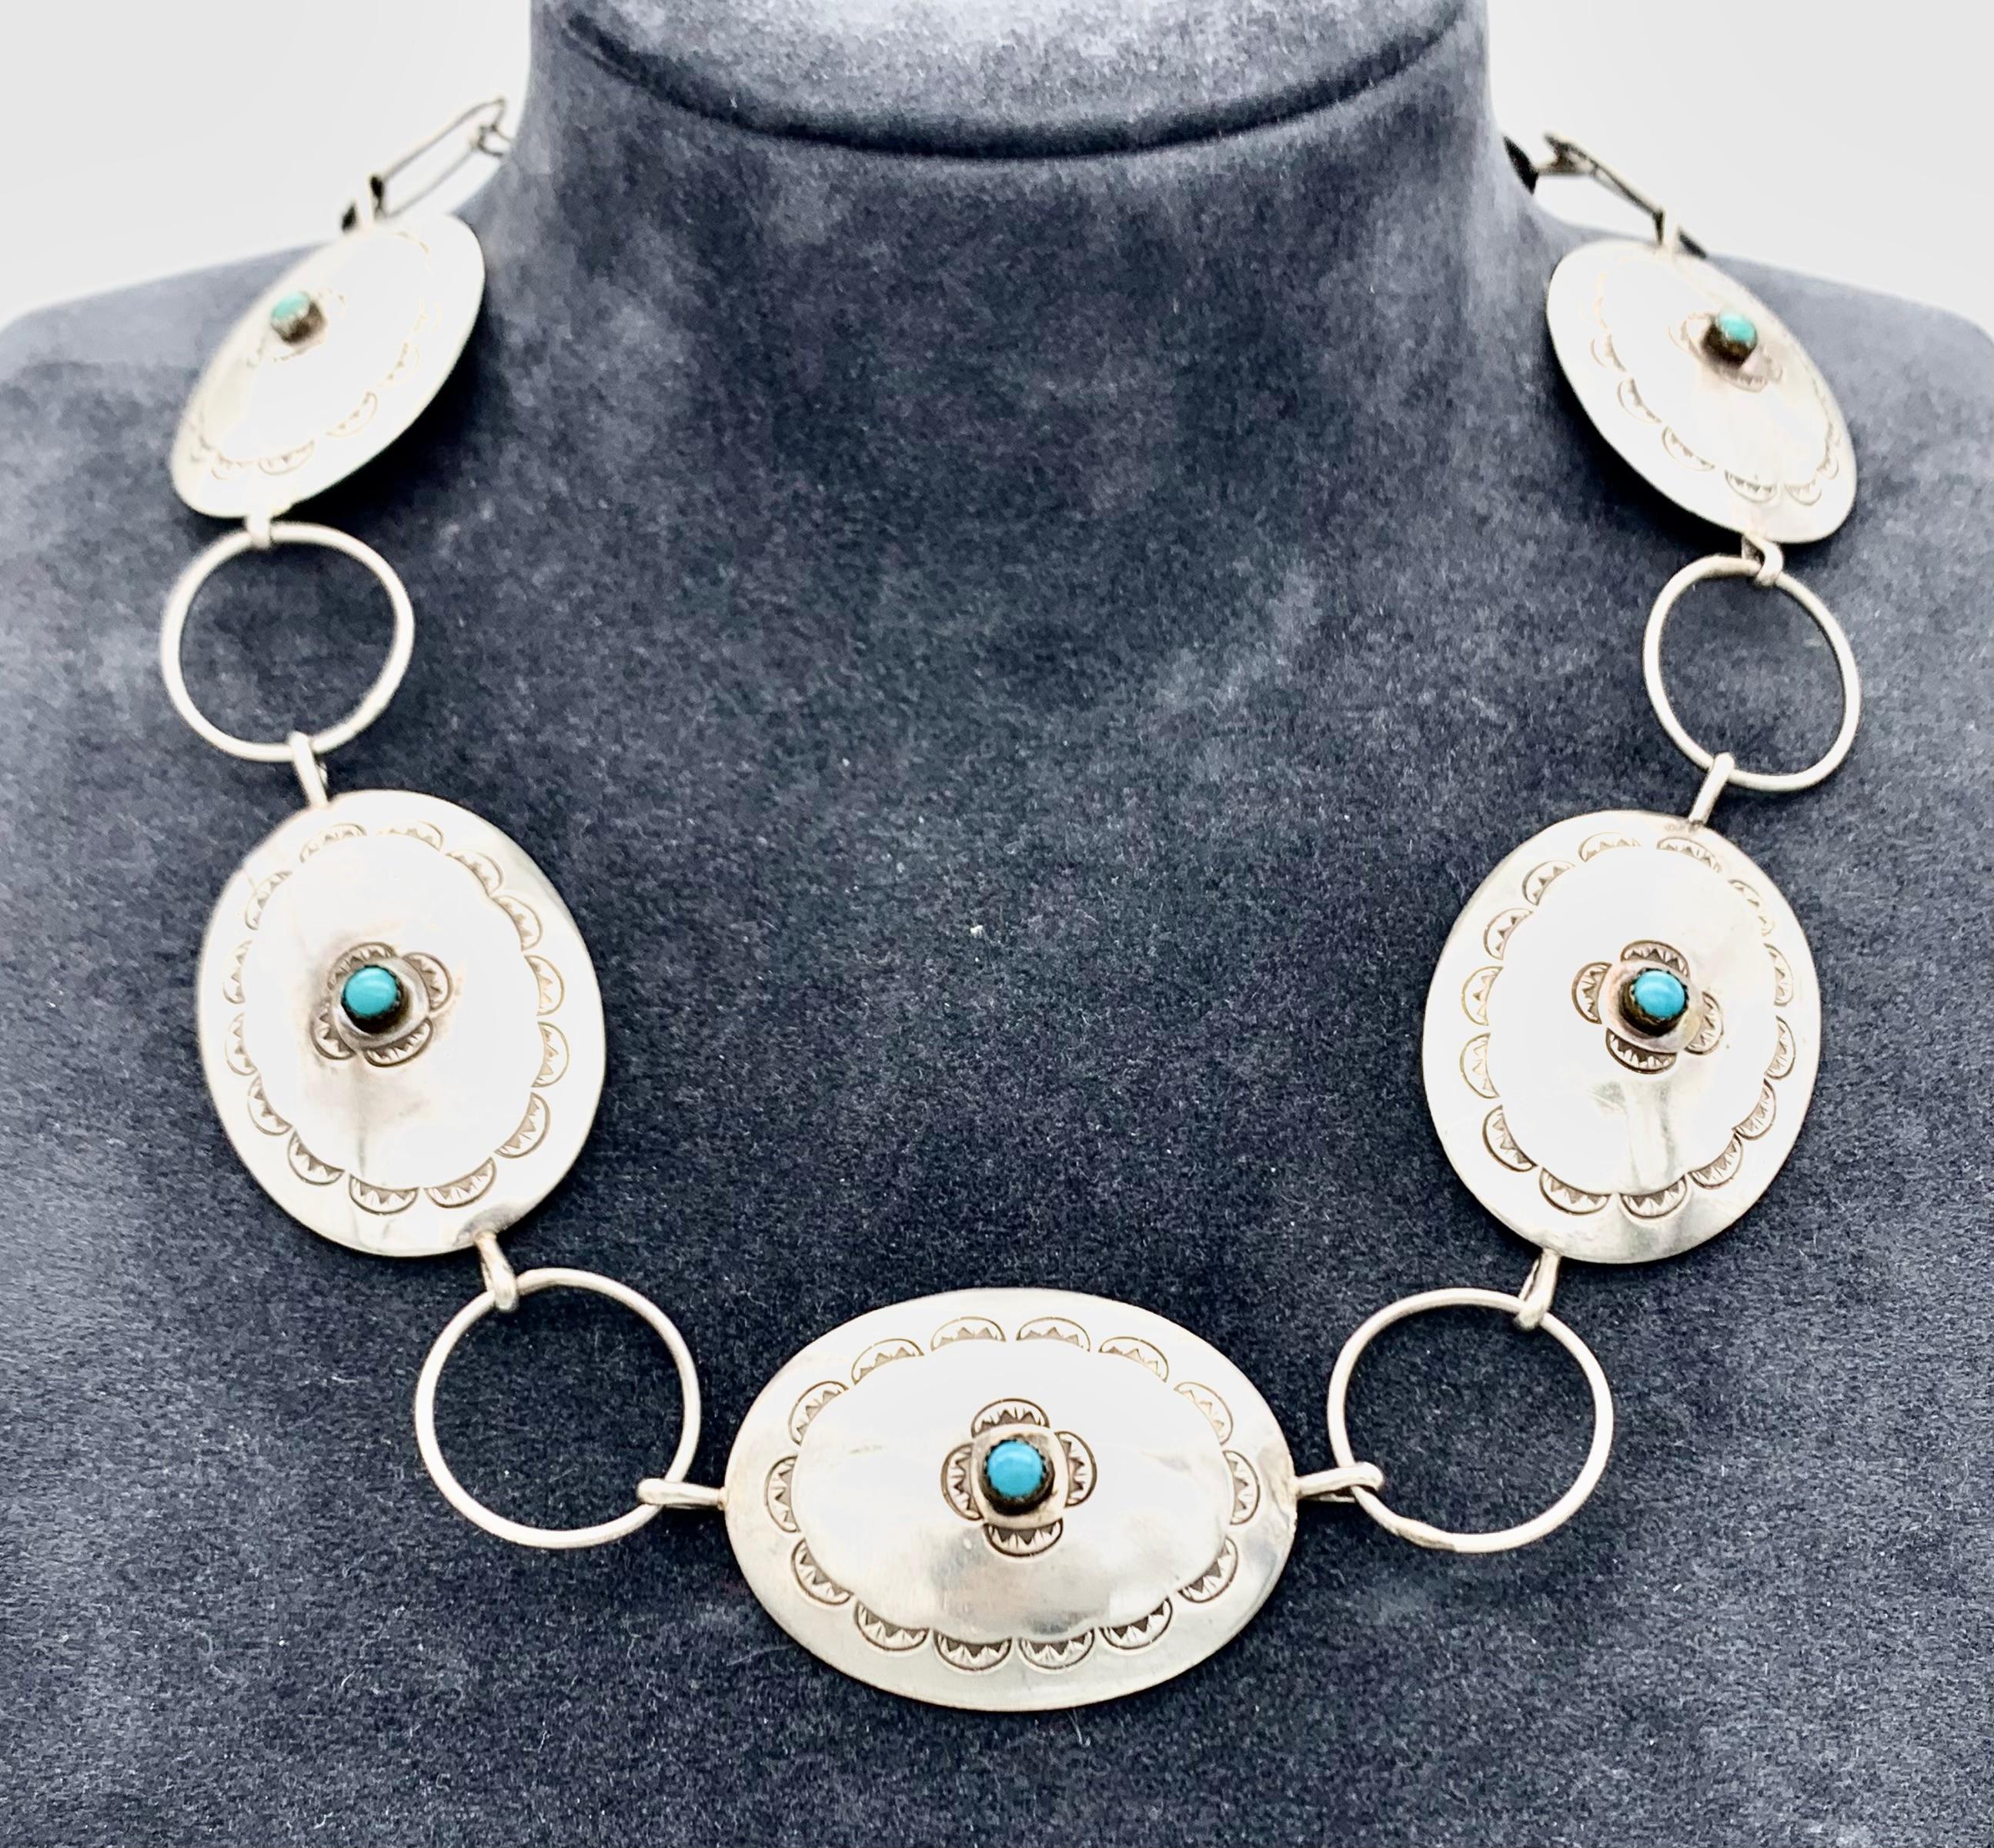 This Sterling silver necklace is decorated with turquoise cabochons and embellished with fine hand-engraving. 